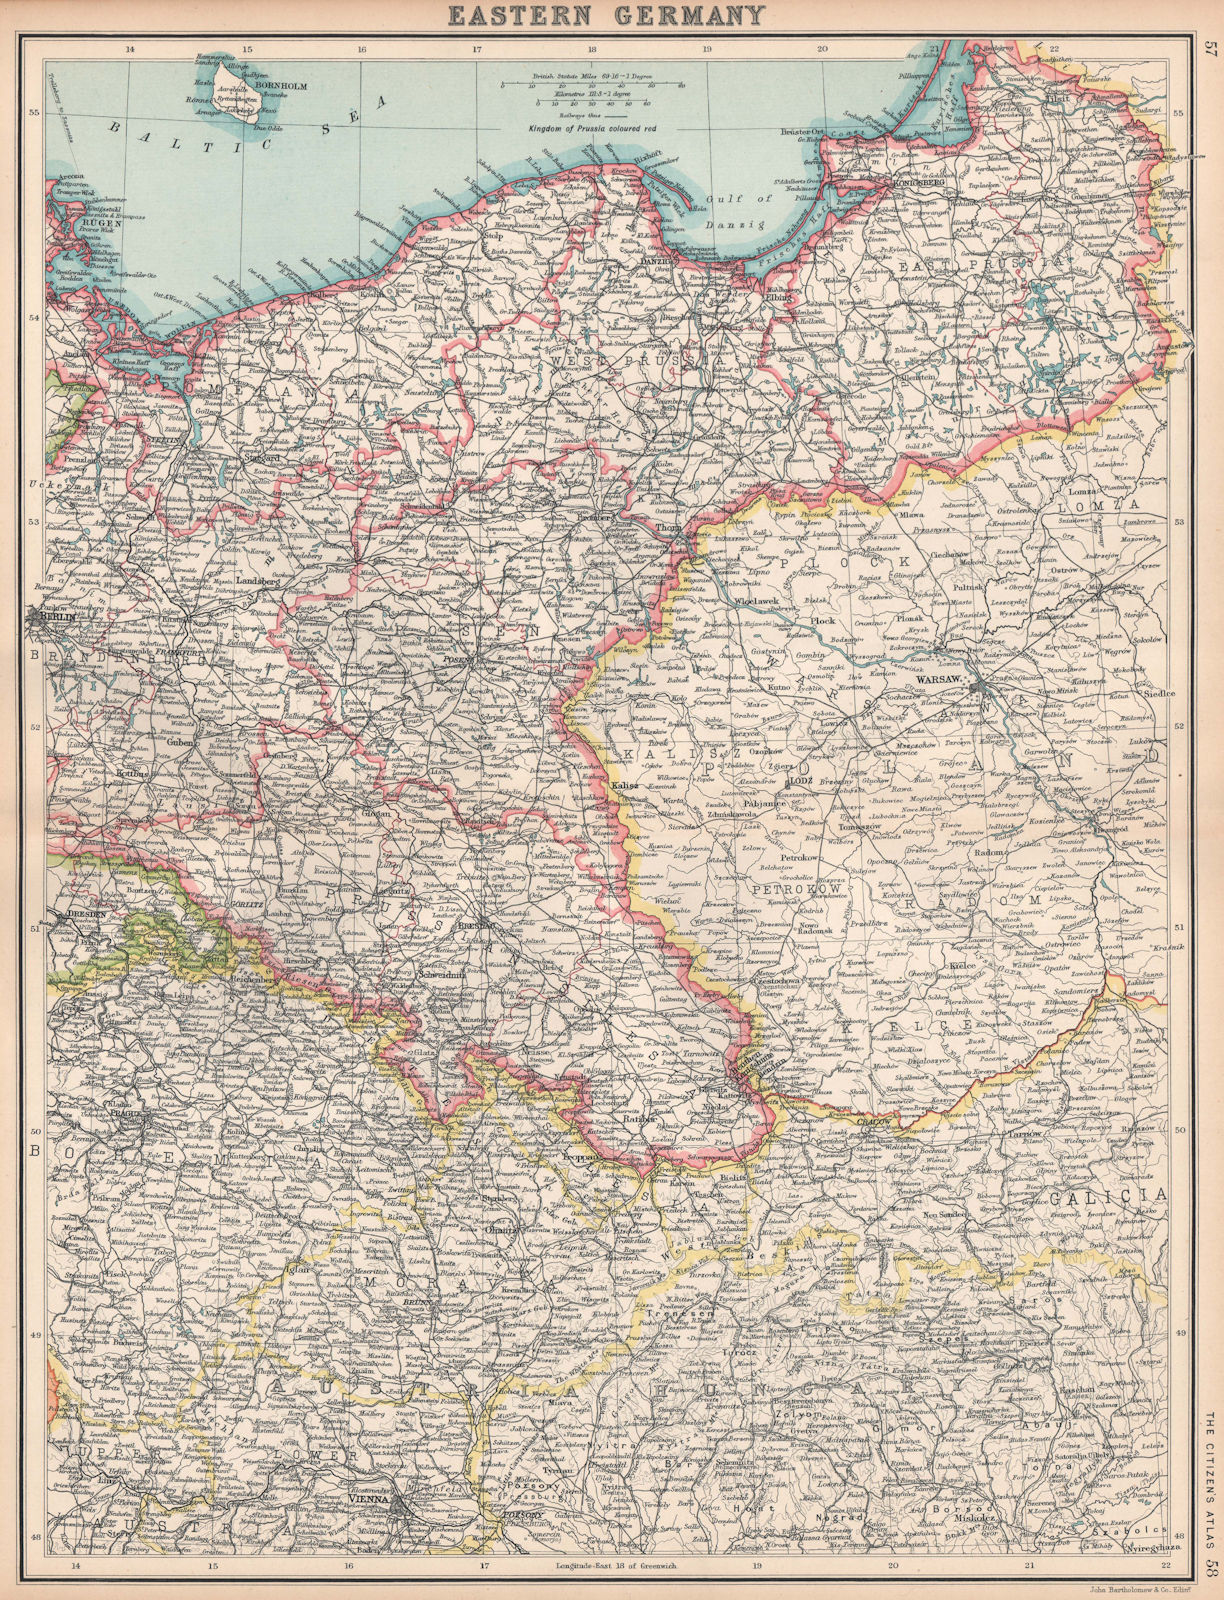 Associate Product EASTERN GERMANY.Showing states.Prussia Silesia Pomerania Poznan.Poland 1912 map